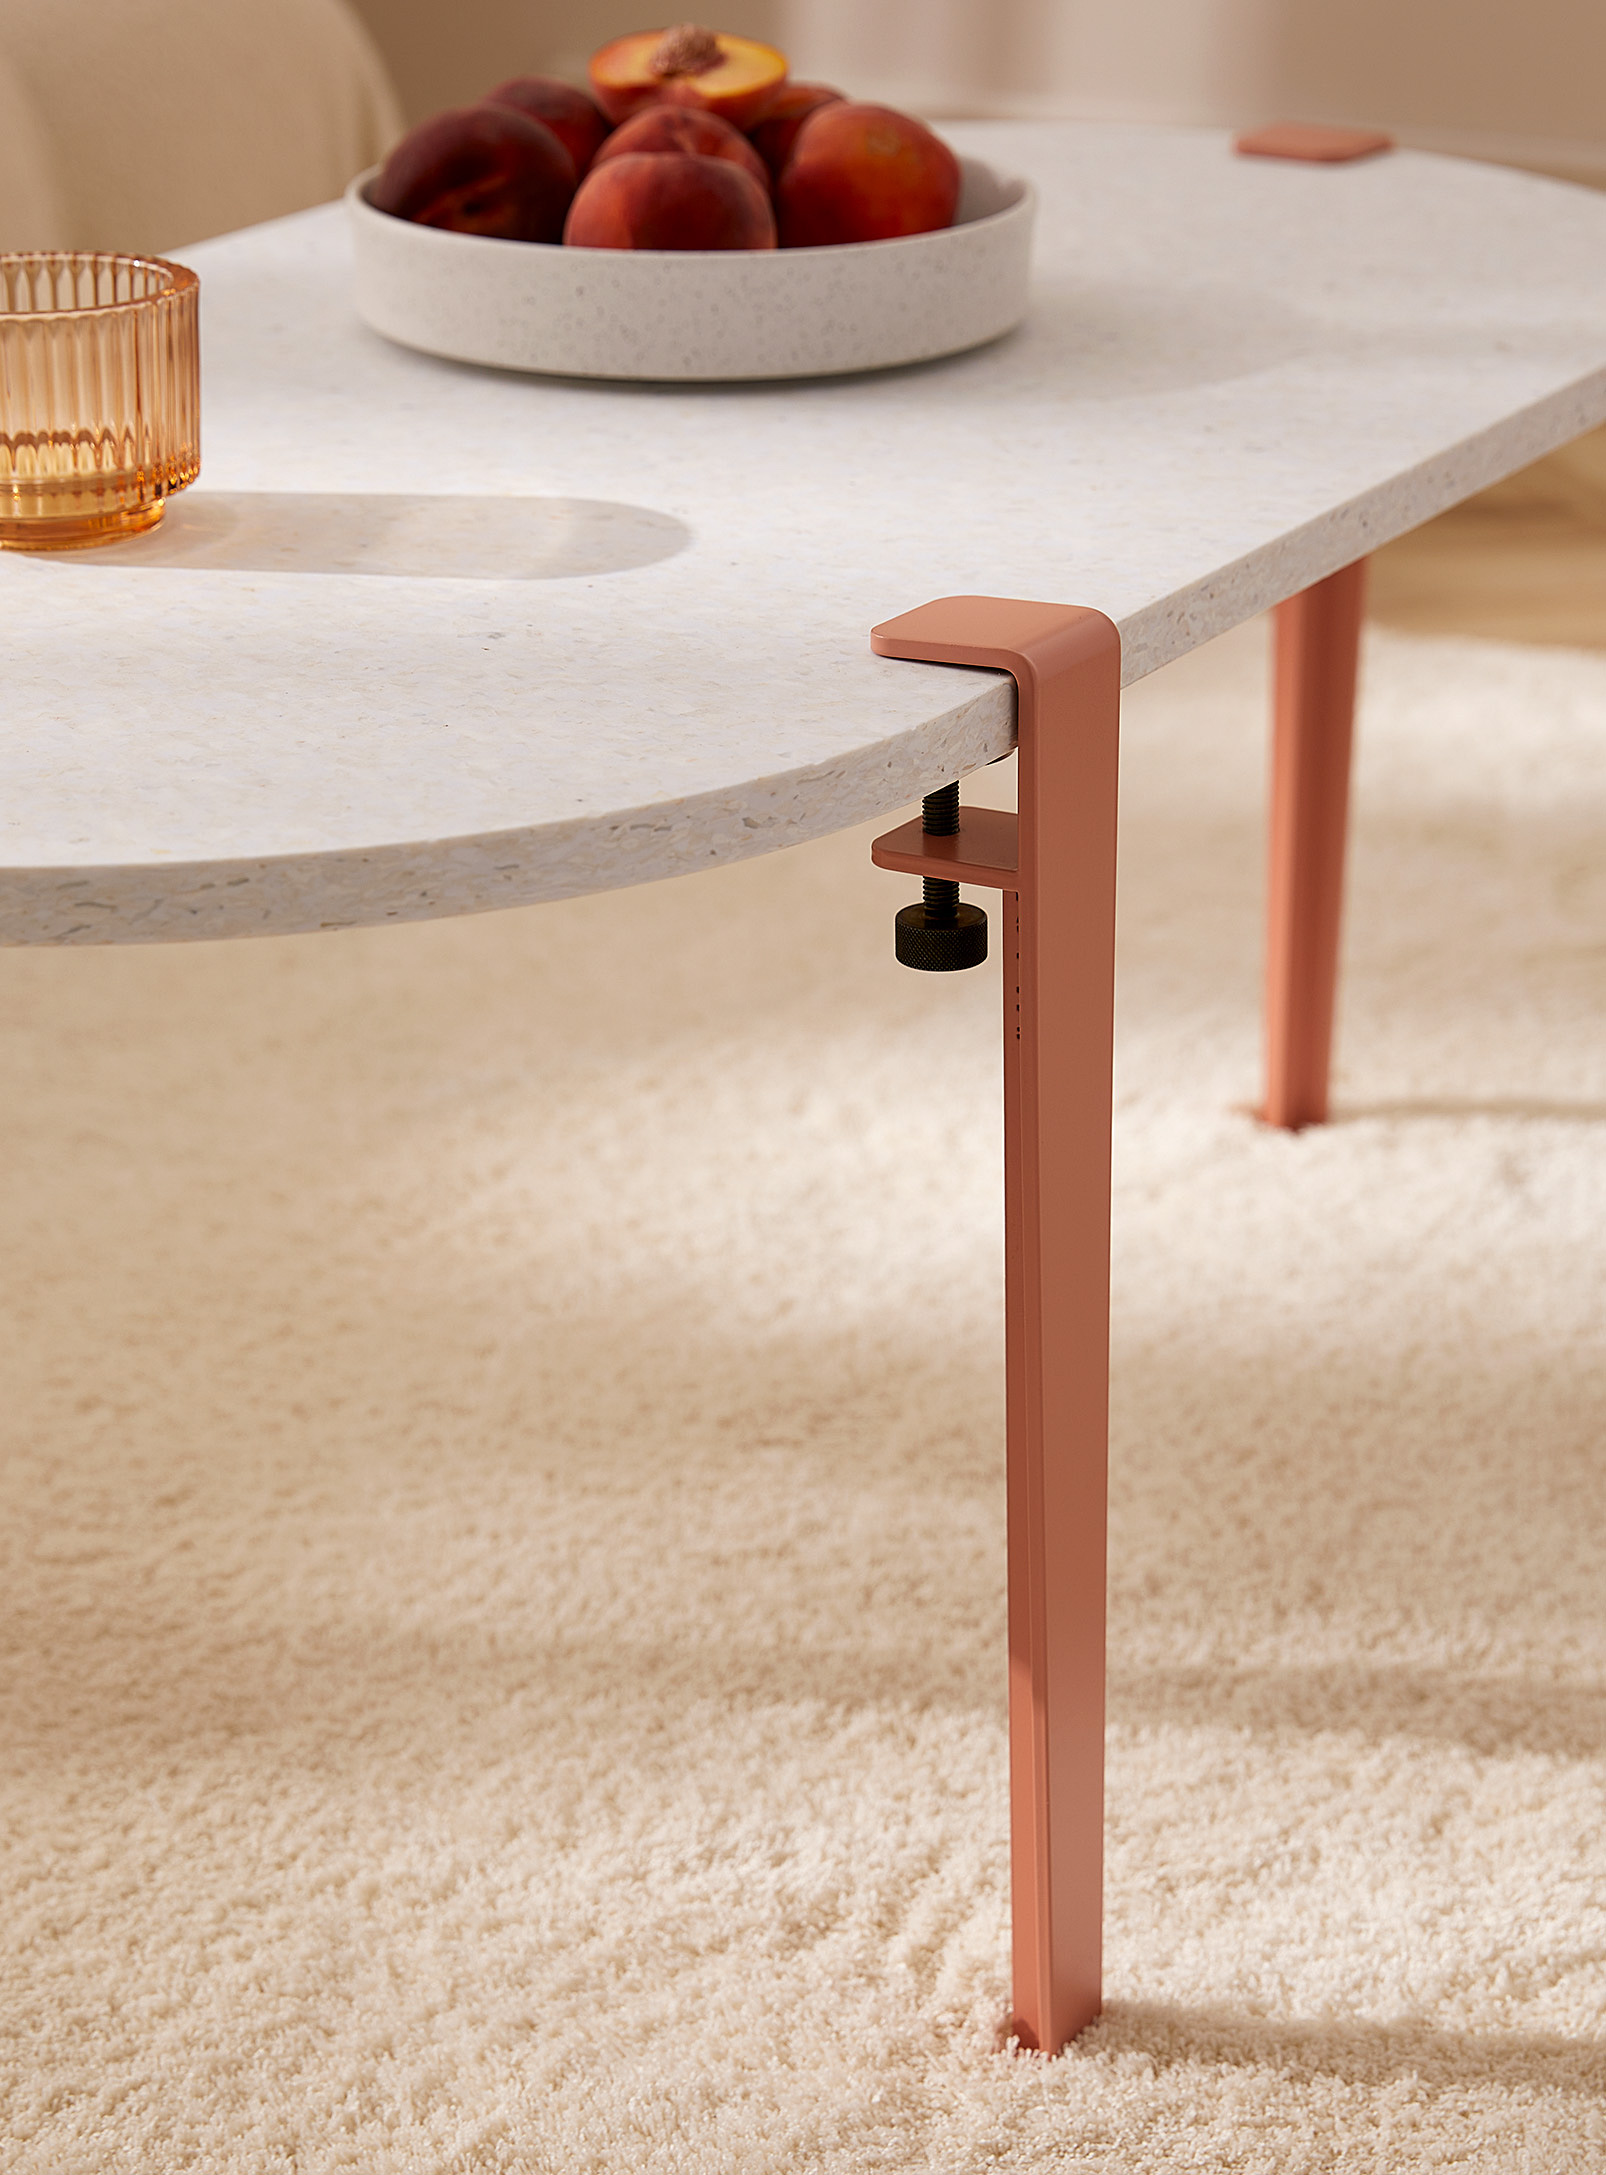 Tiptoe 17 Coffee Table And Bench Legs Set Of 4 In Dusky Pink